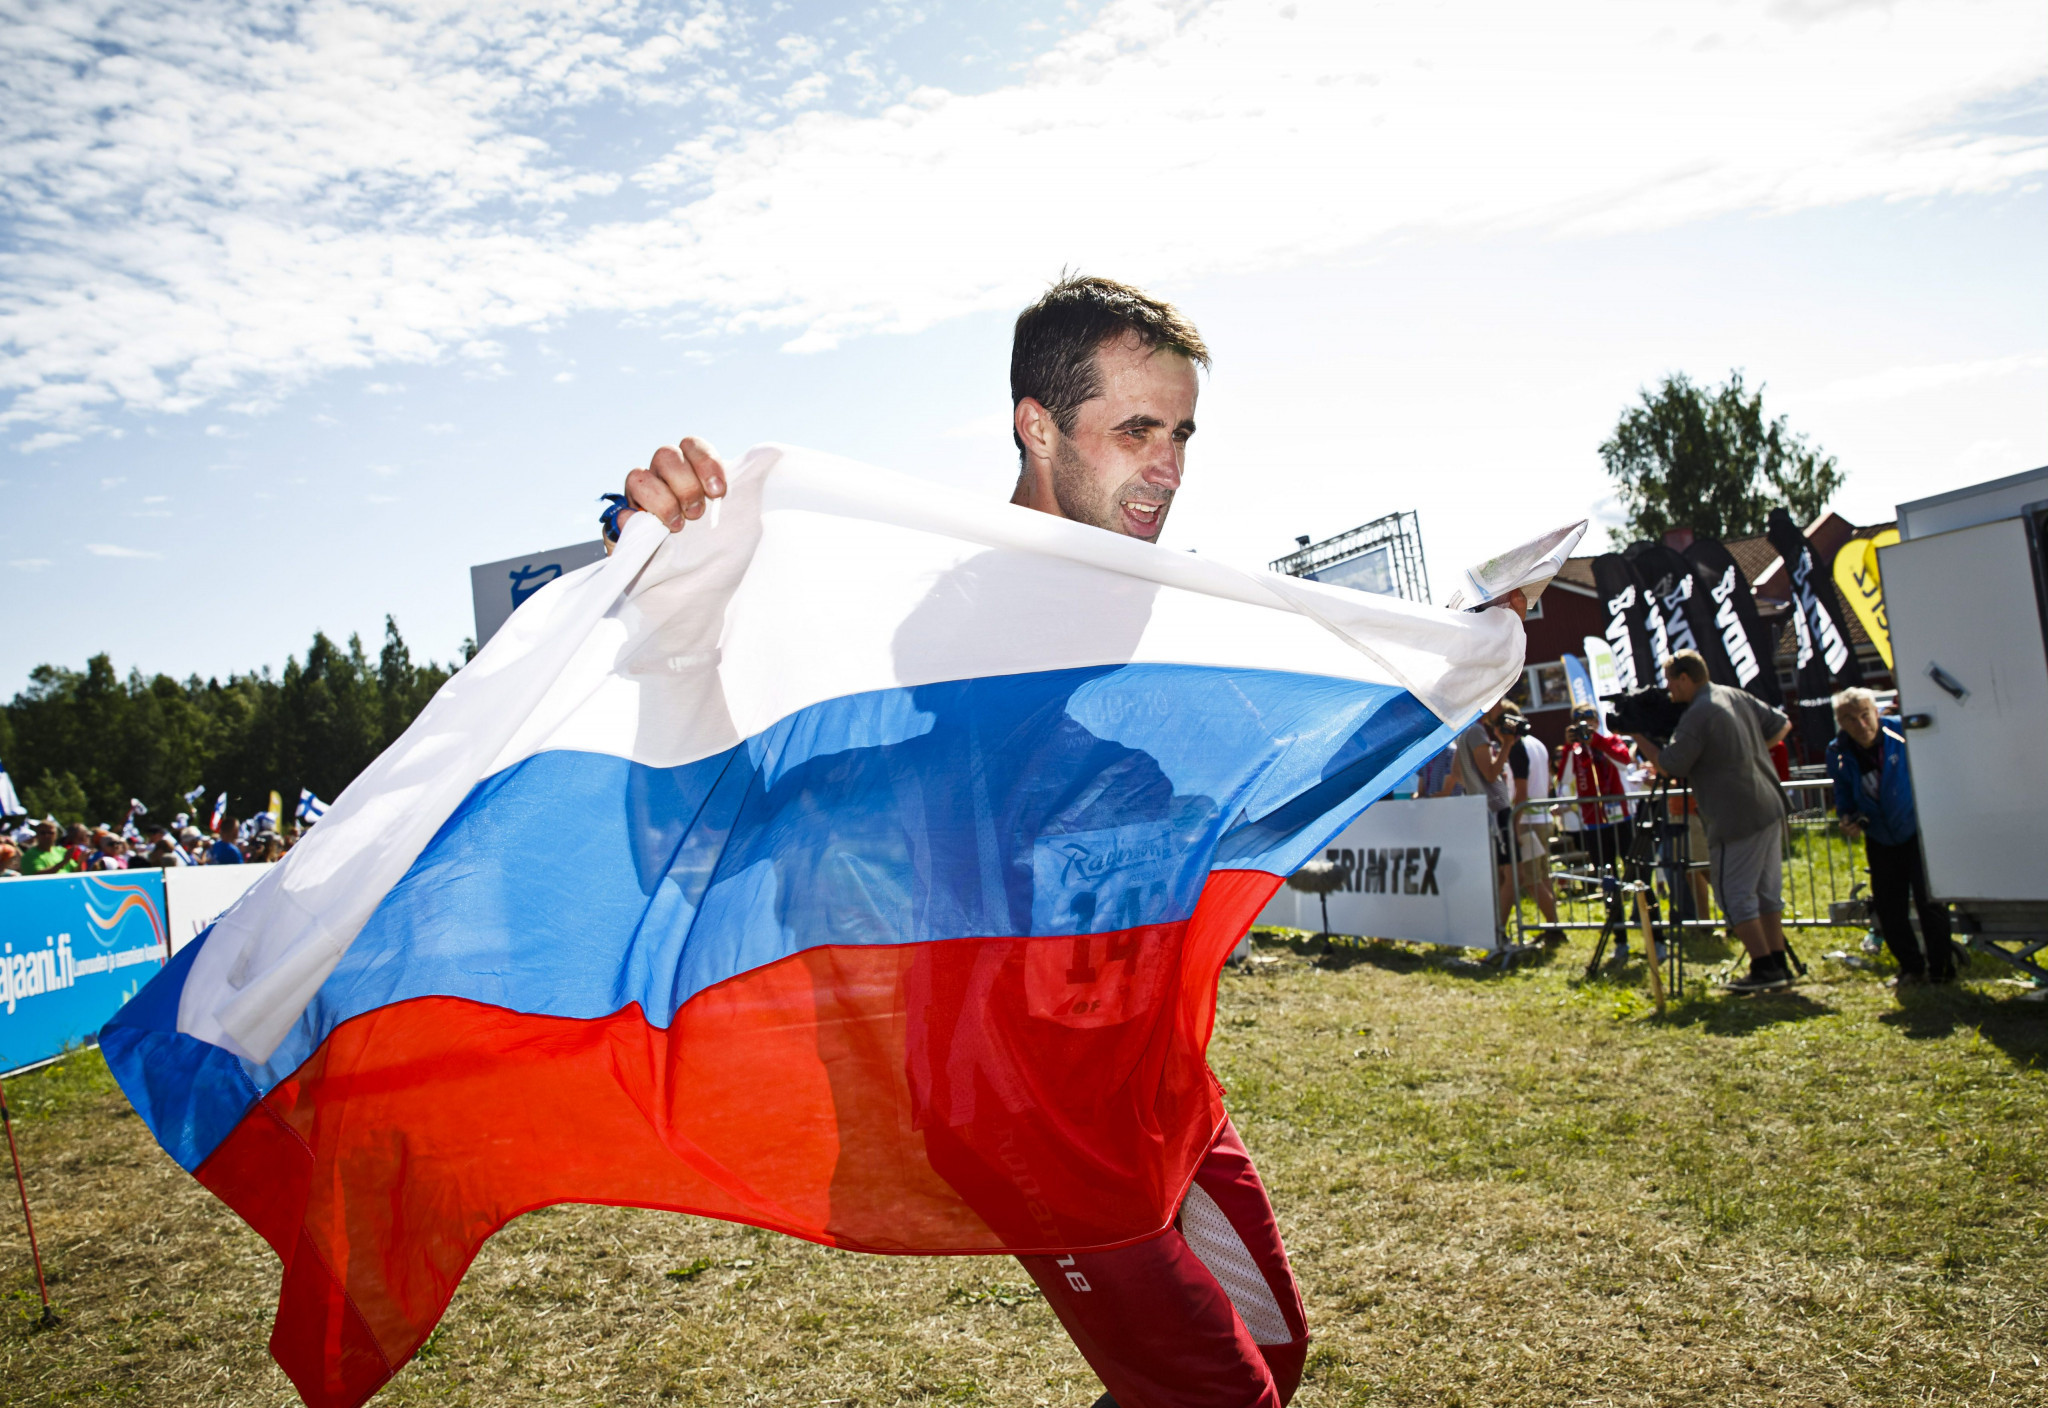 Russia will be banned from competing in sports such as orienteering ©Getty Images